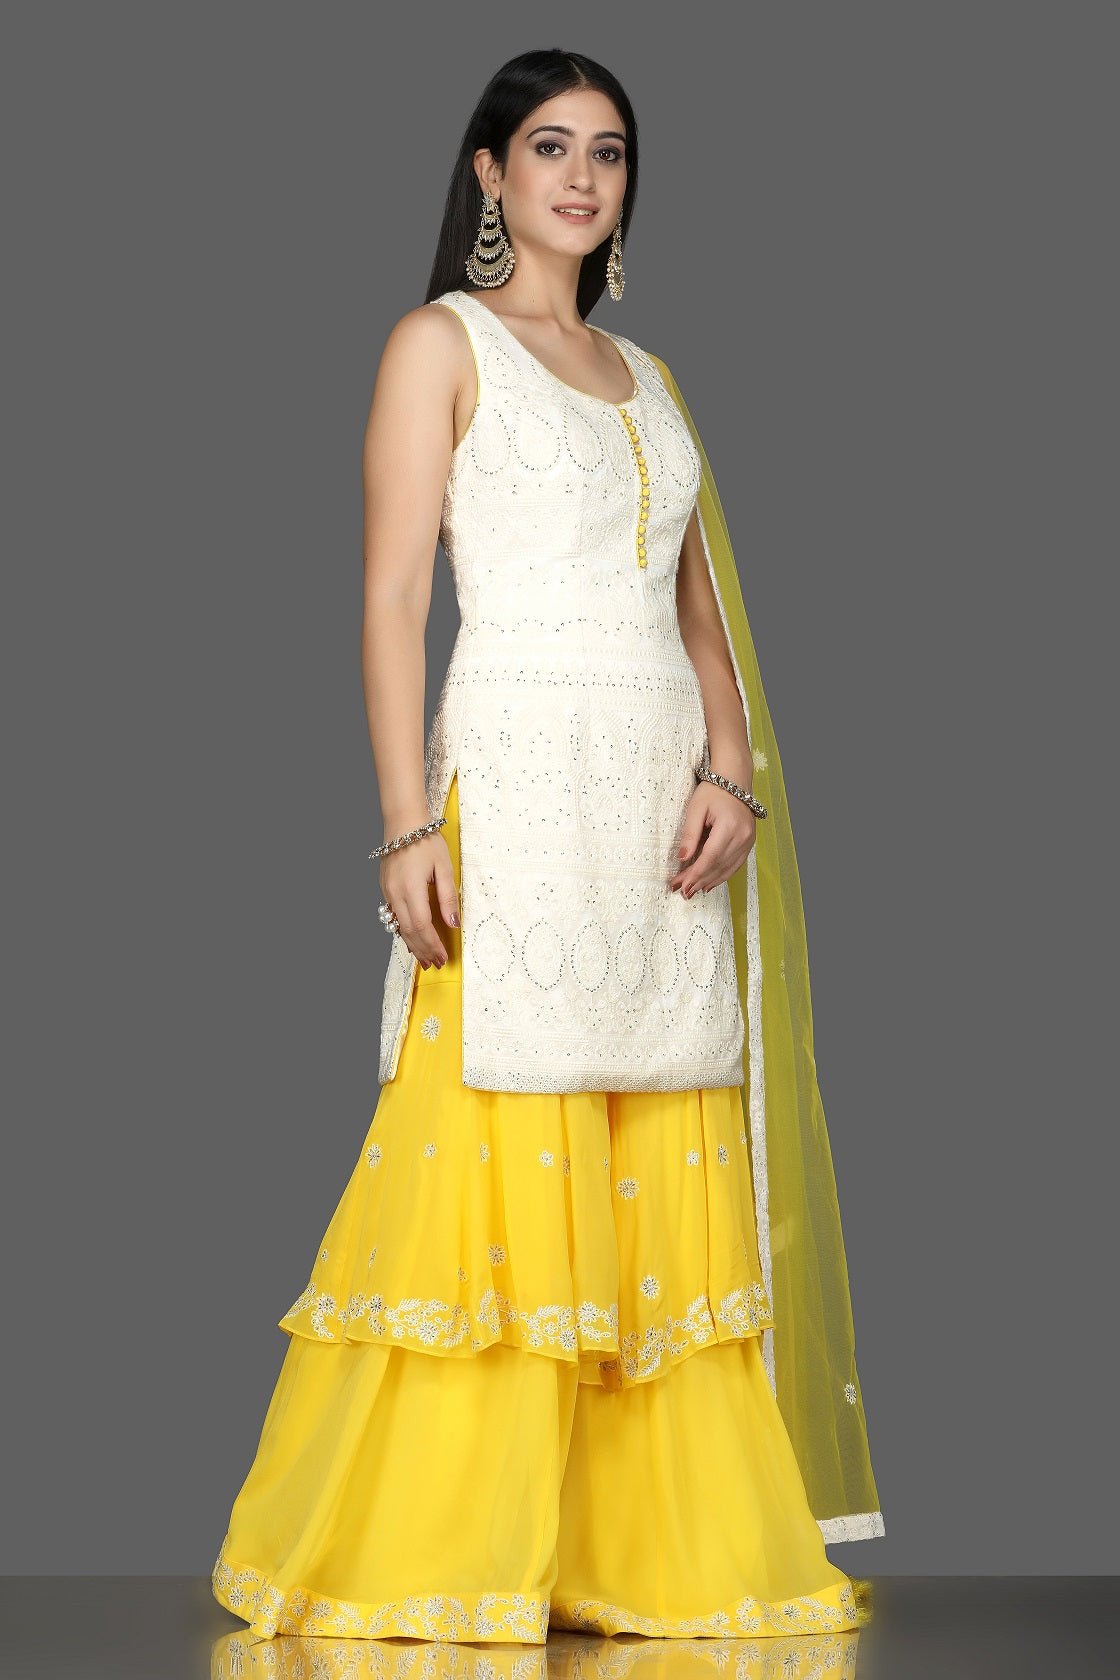 Shop white Lucknowi kurta online in USA with yellow georgette sharara. Flaunt ethnic fashion with exquisite designer lehenga, Indian wedding dresses, Anarkali suits from Pure Elegance Indian fashion boutique in USA.-side